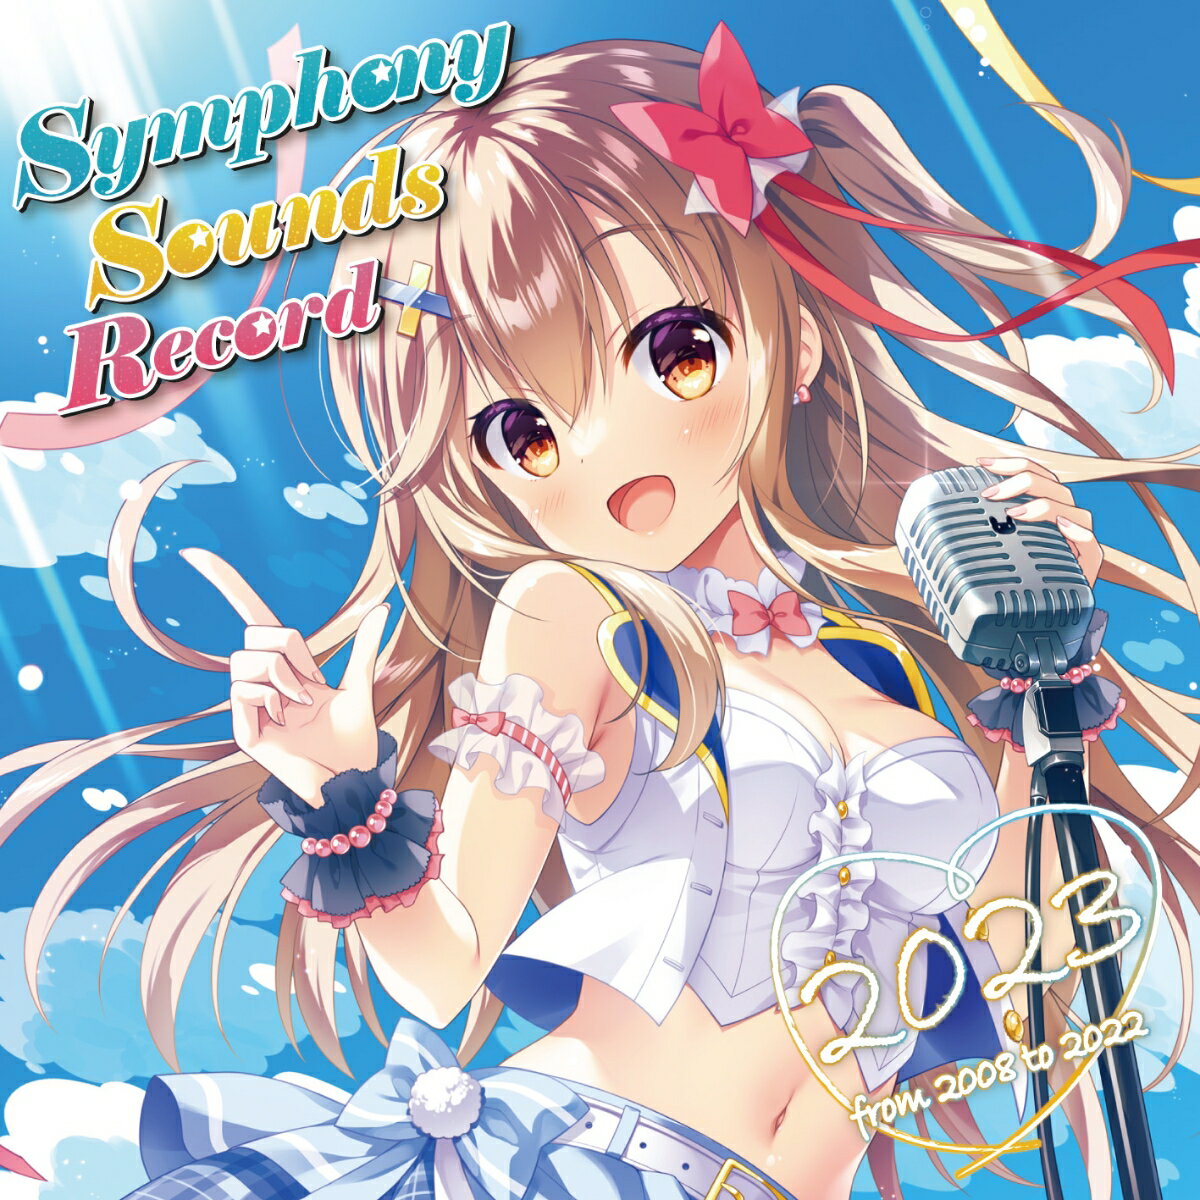 Symphony Sounds Record 2023 〜from 2008 to 2022〜